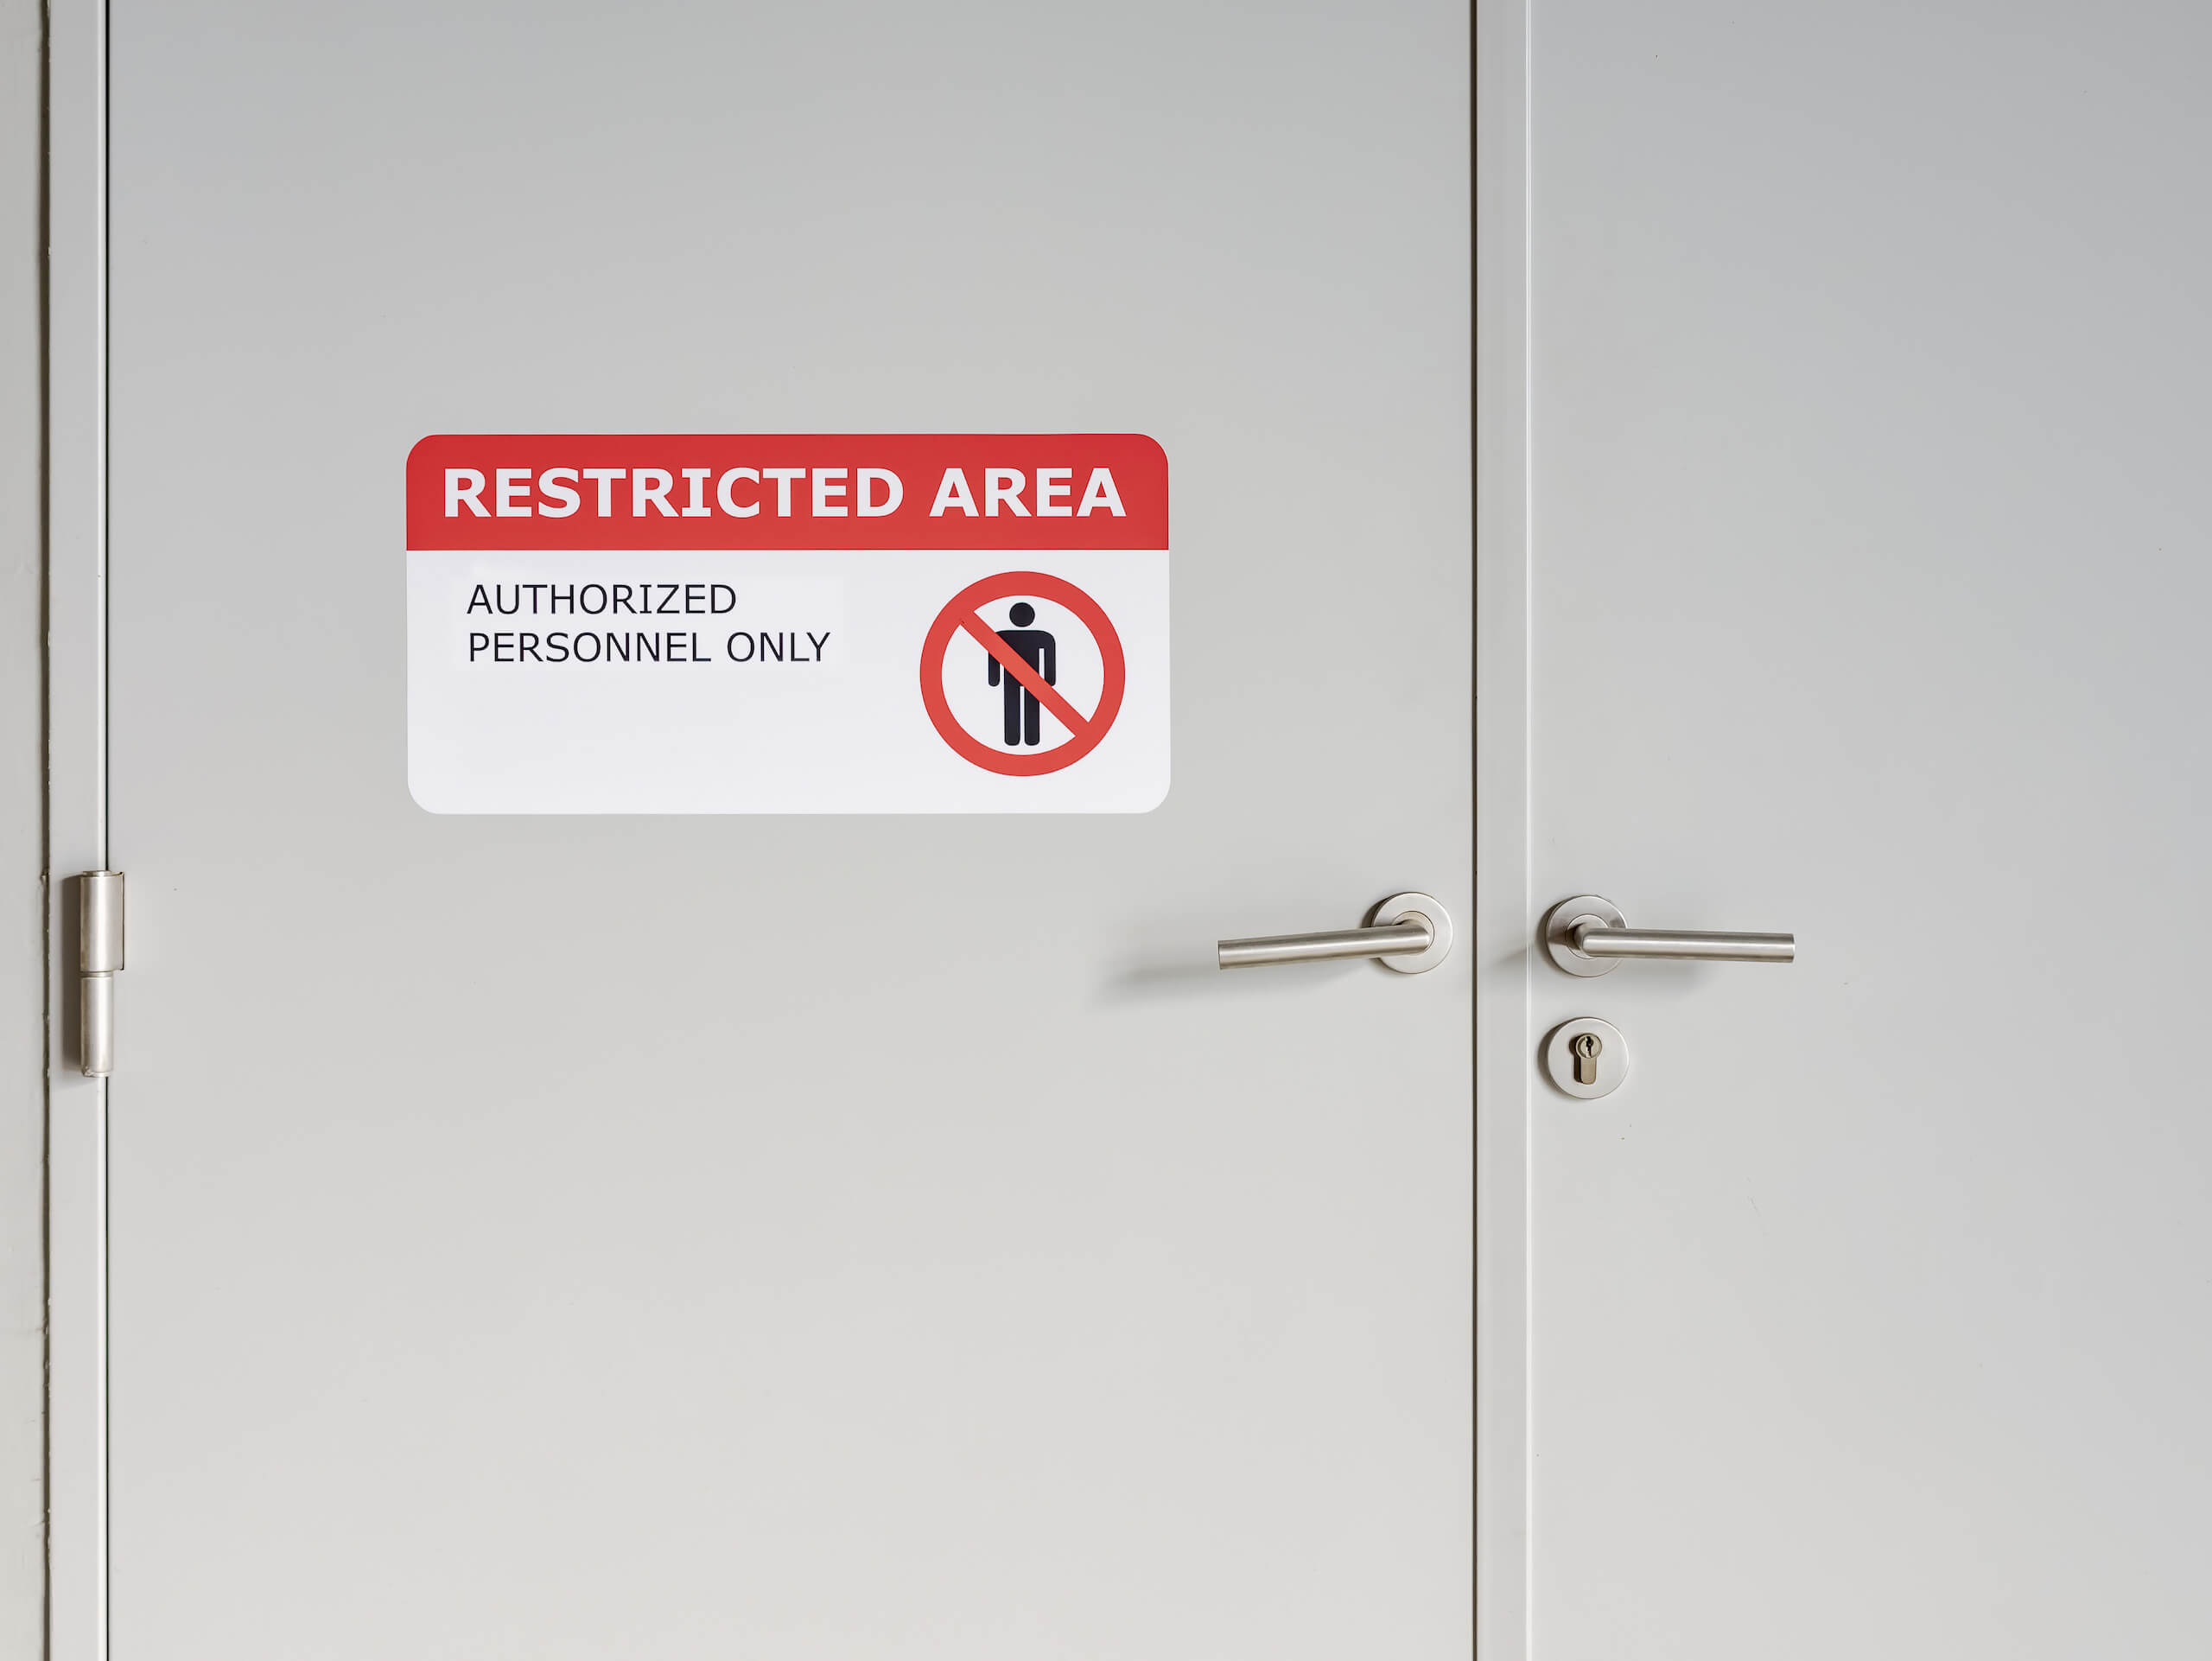 Reduce Risk & Improve Workplace Health & Safety through Access Management & Key Security